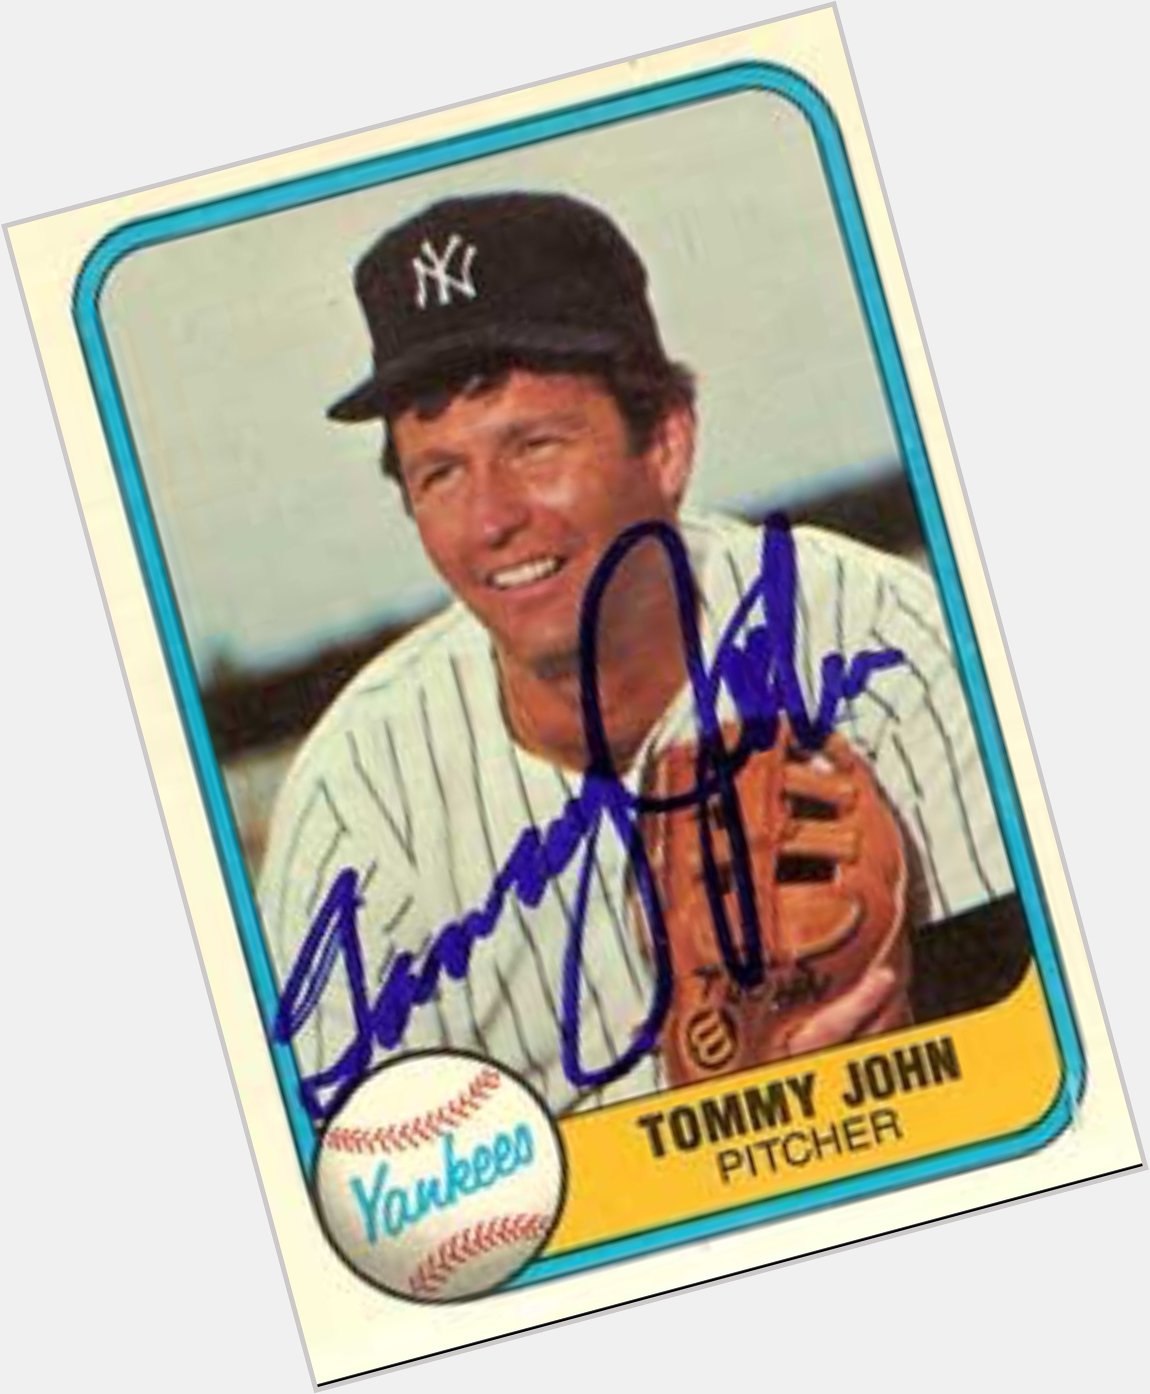 Happy Birthday to the great Mr. Tommy John himself! 